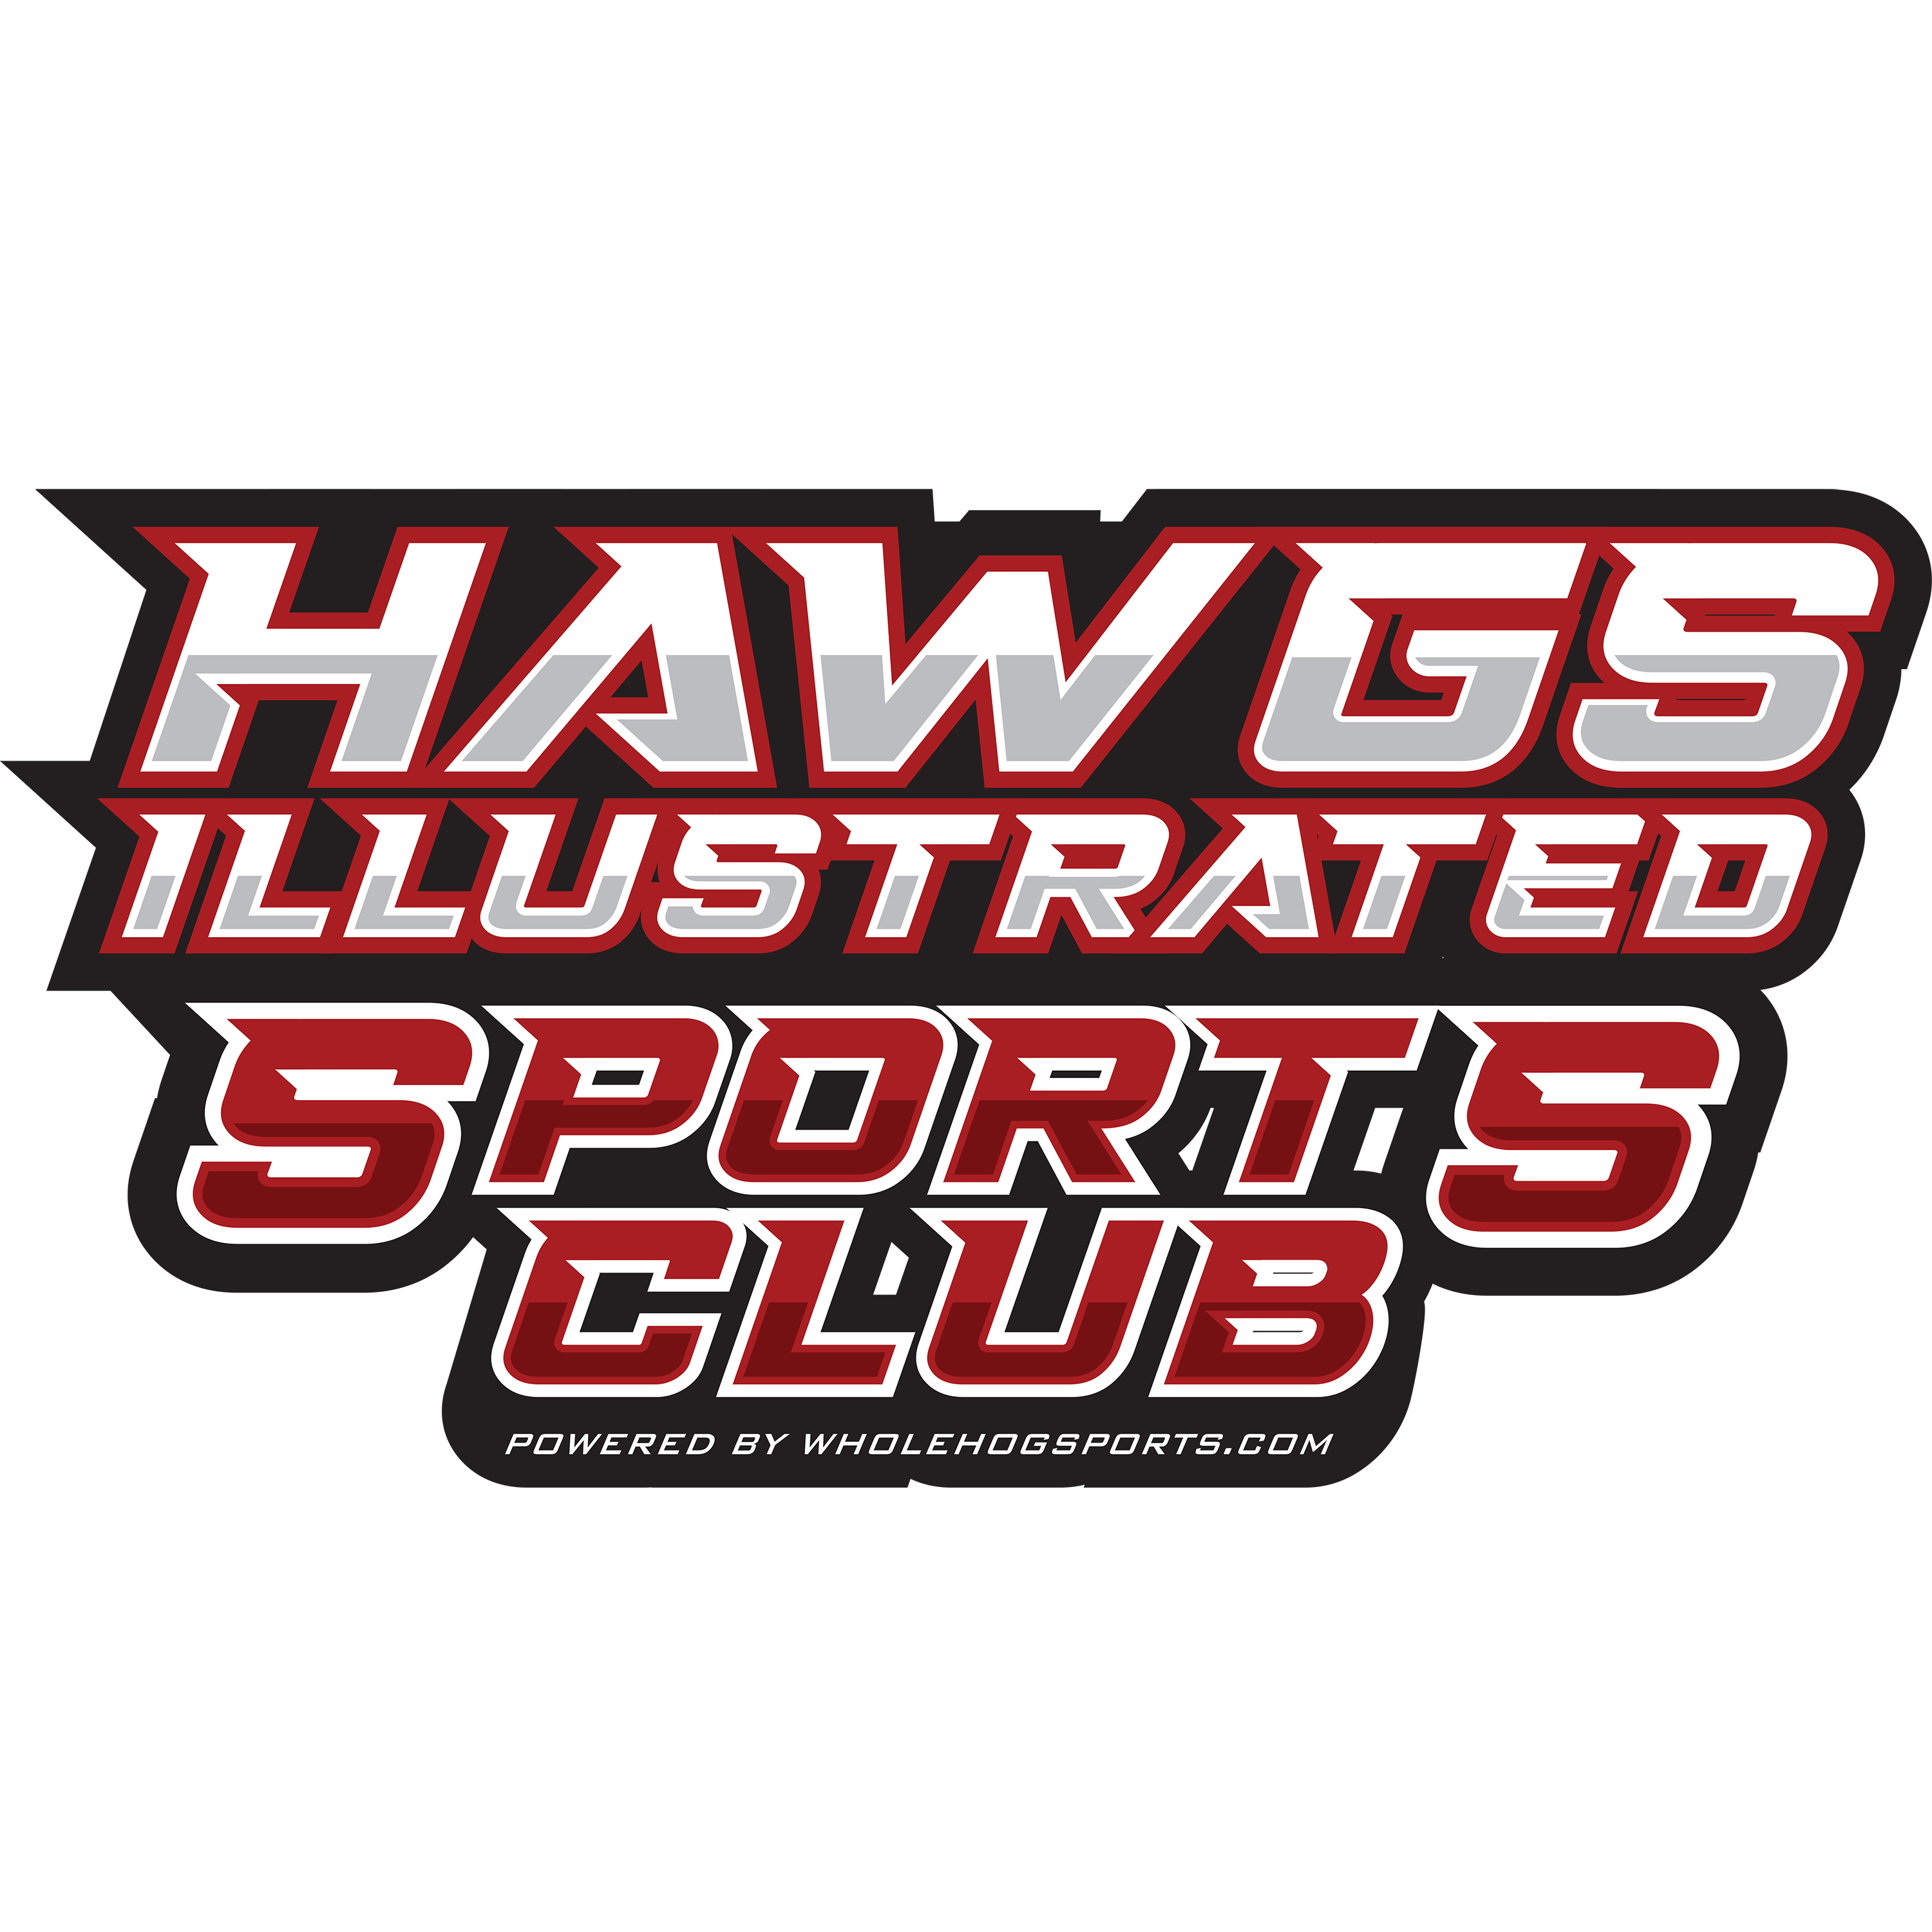 Hawgs Illustrated Sports Club Podcast: Guest speaker Dr. Fitz Hill